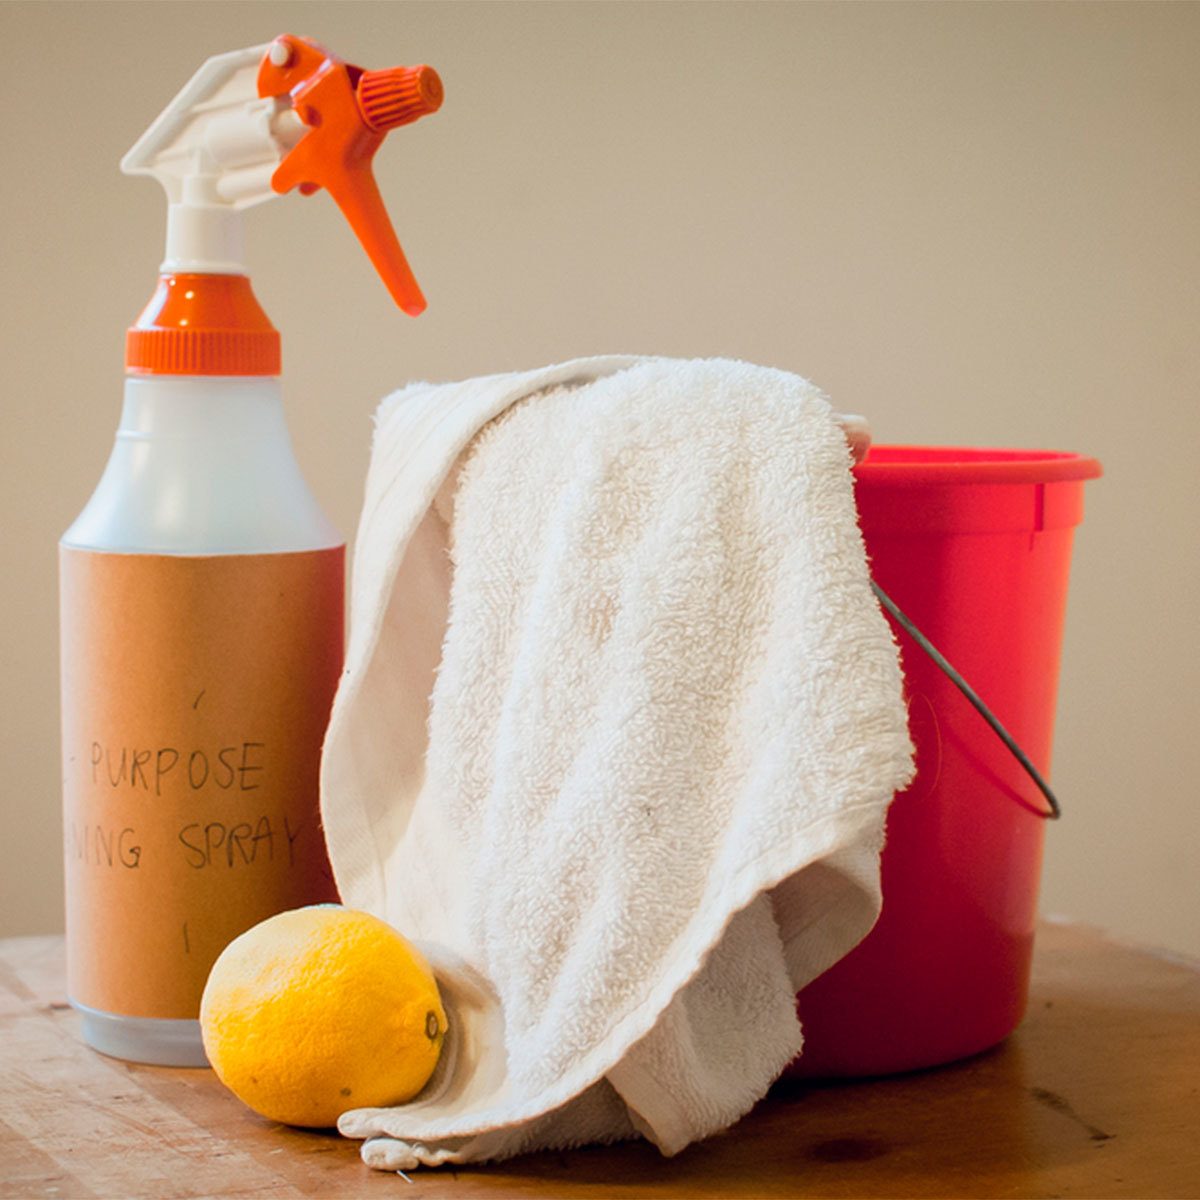 Wet & Forget: More Than Just a DIY Home Cleaning Product